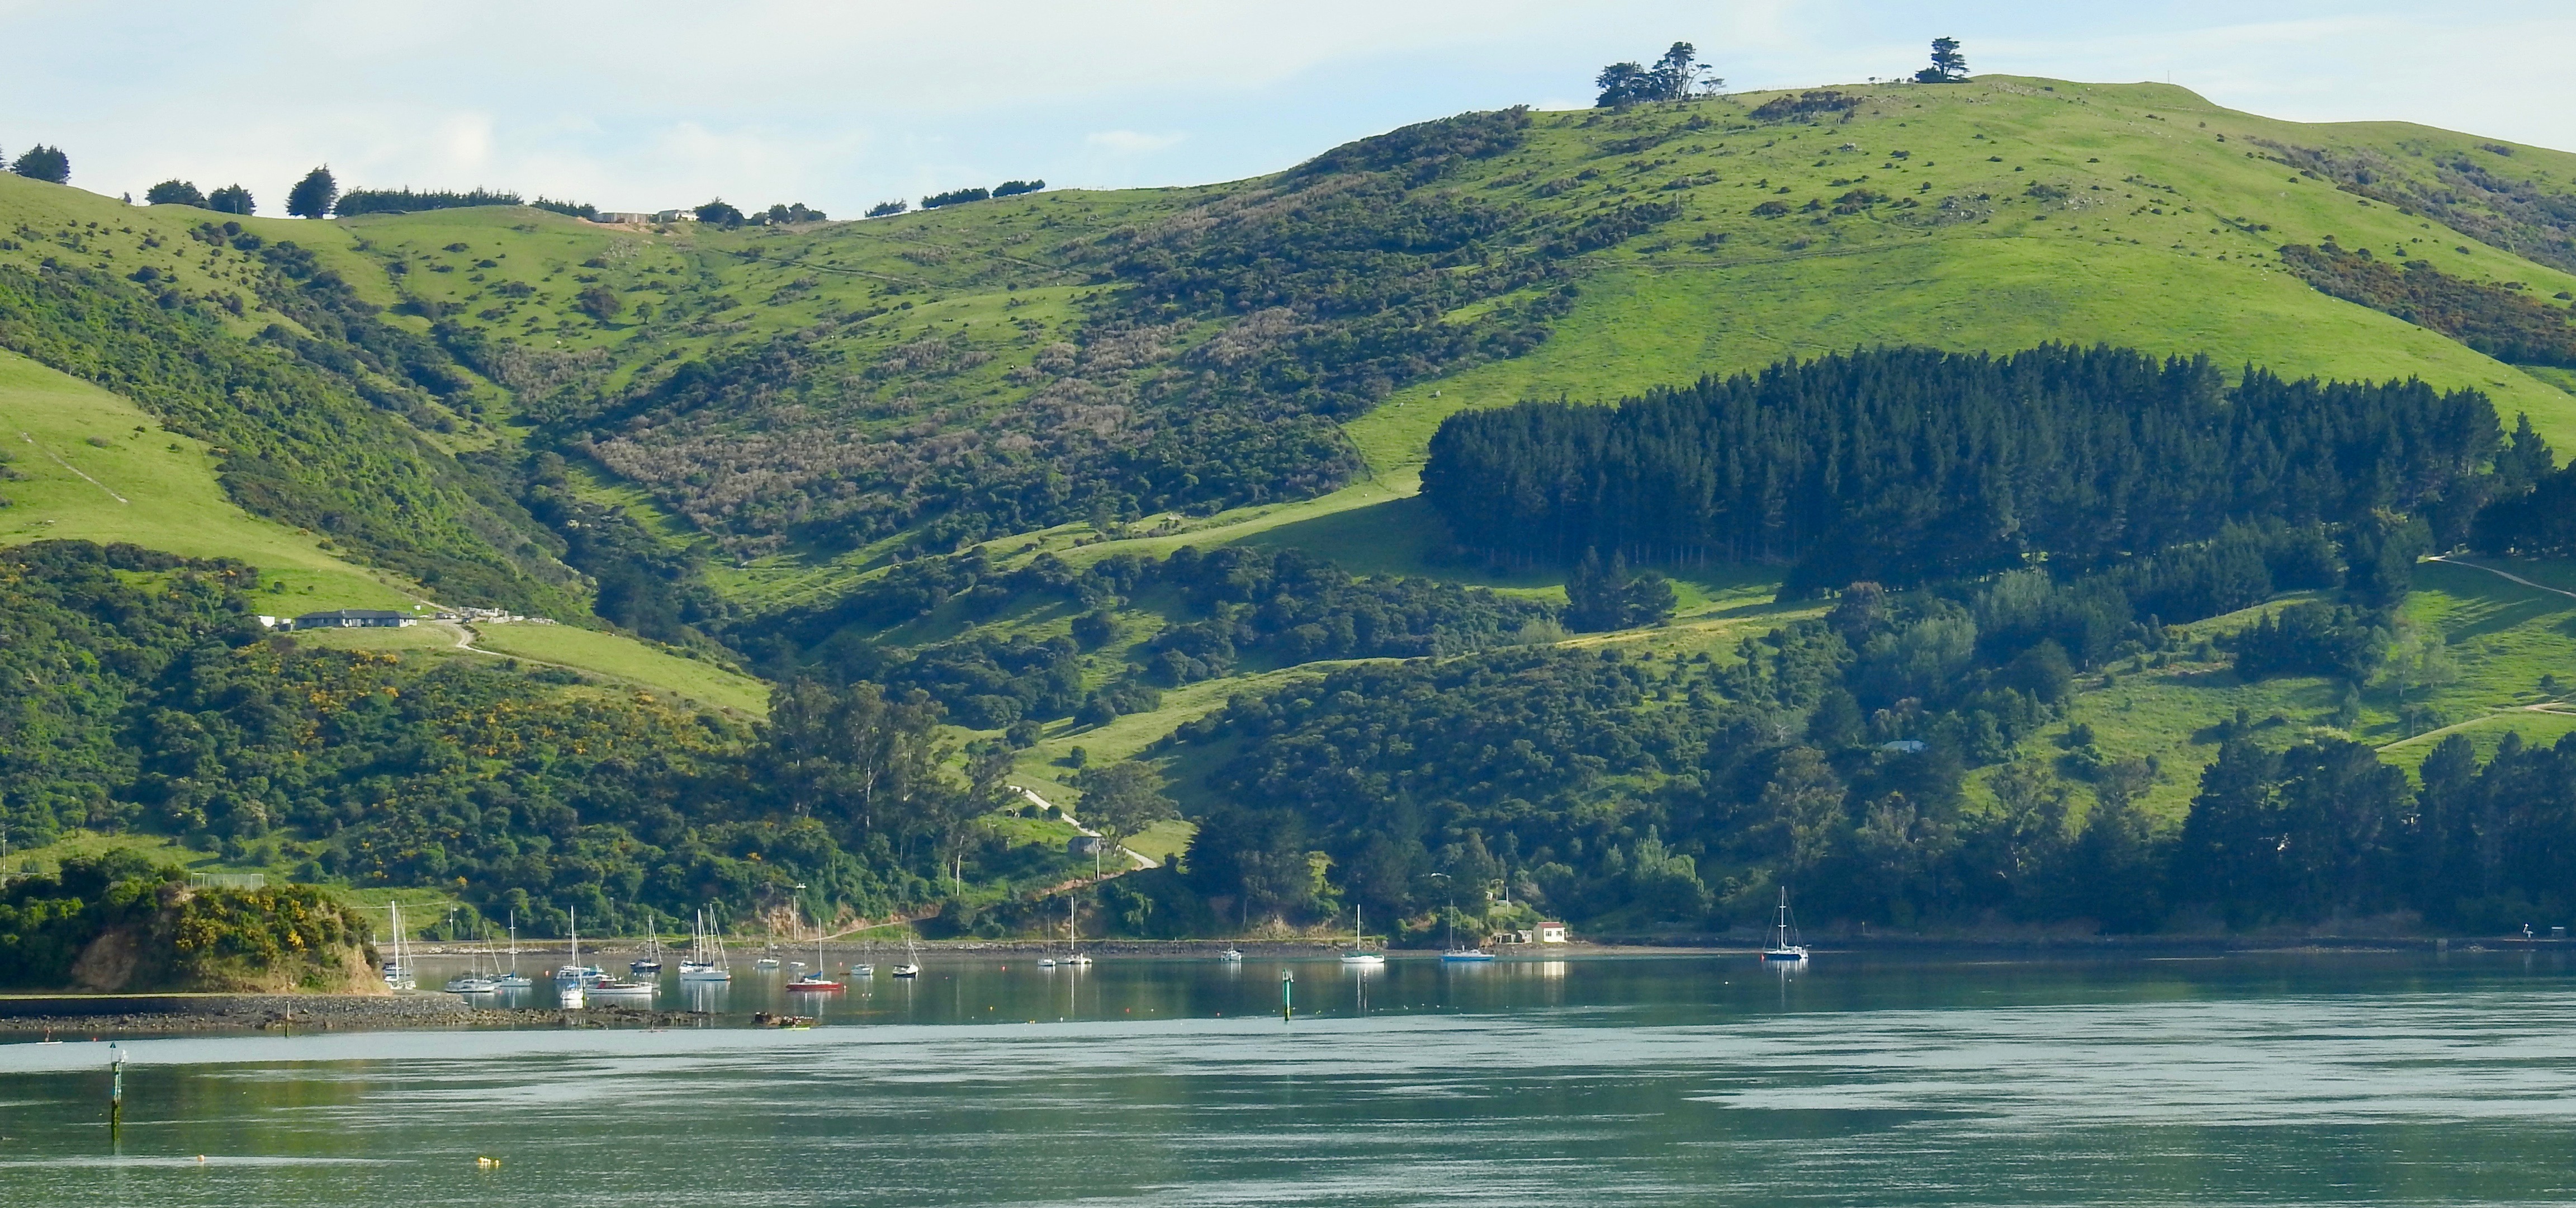 Sailing out of Port Chalmers, Otago Peninsula, NZ, and leaving the beautiful town of Dunedin behind. www.gypsyat60.com